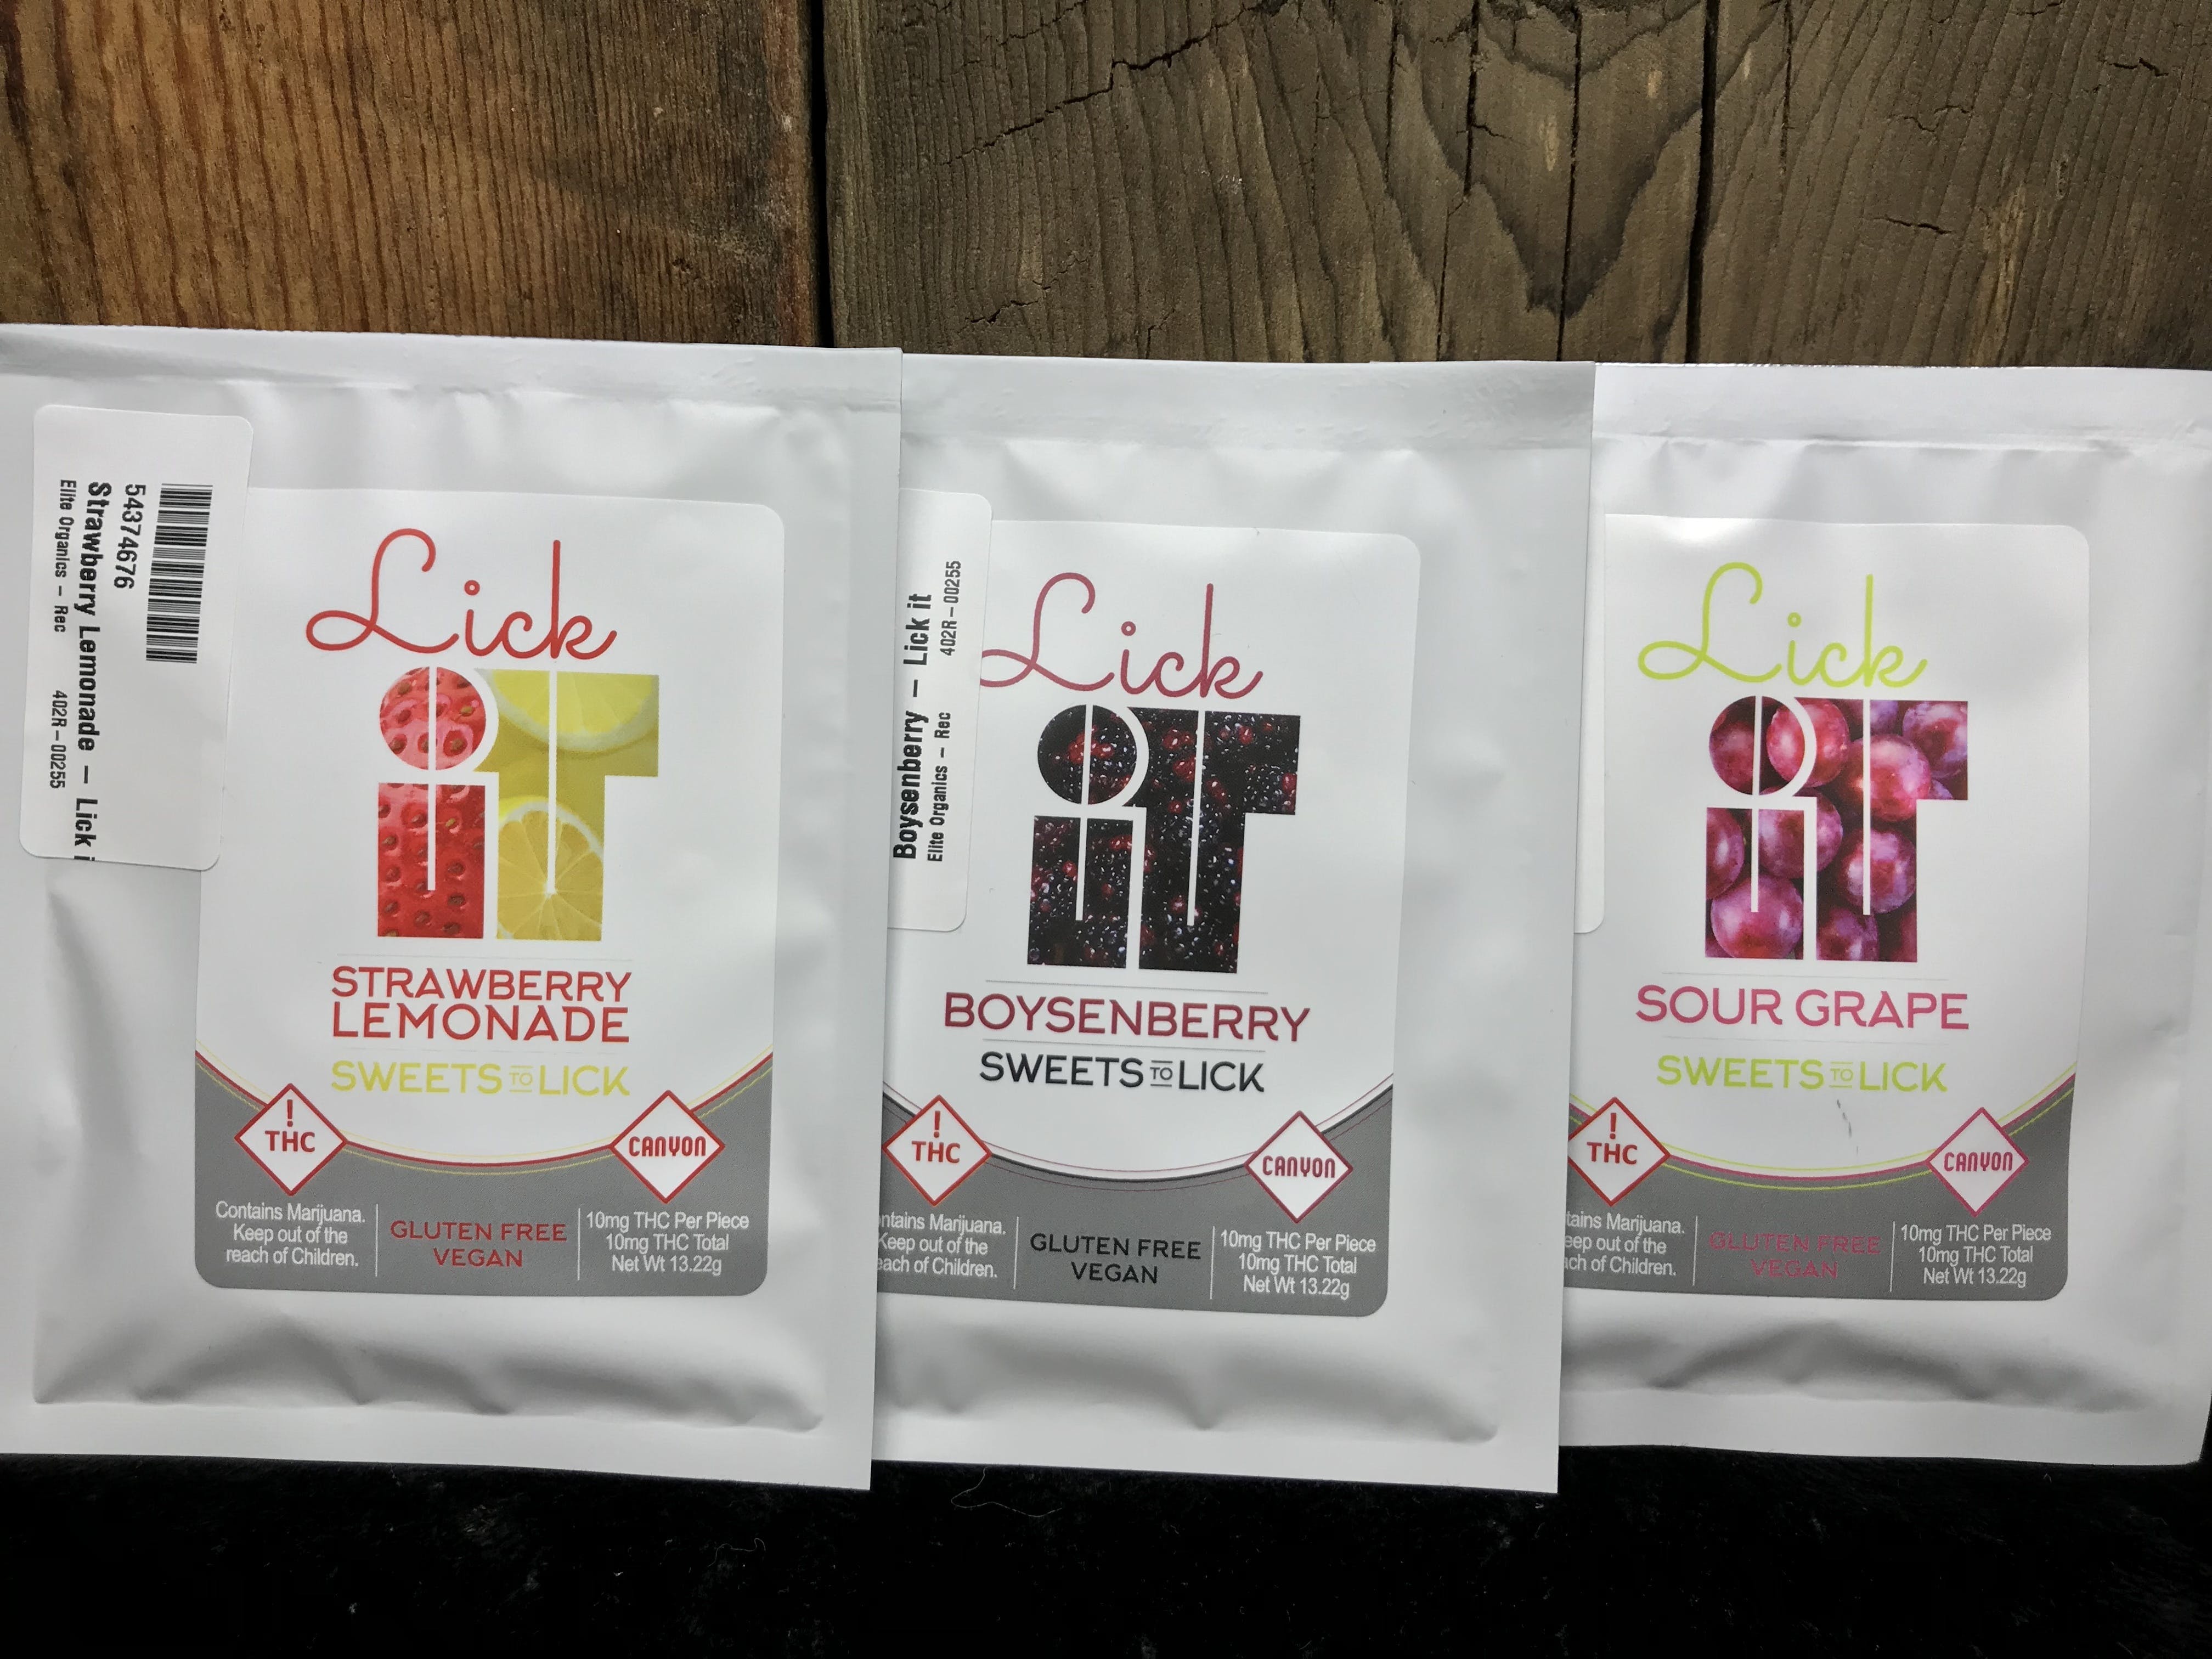 edible-canyon-cultivation-lickit-10mg